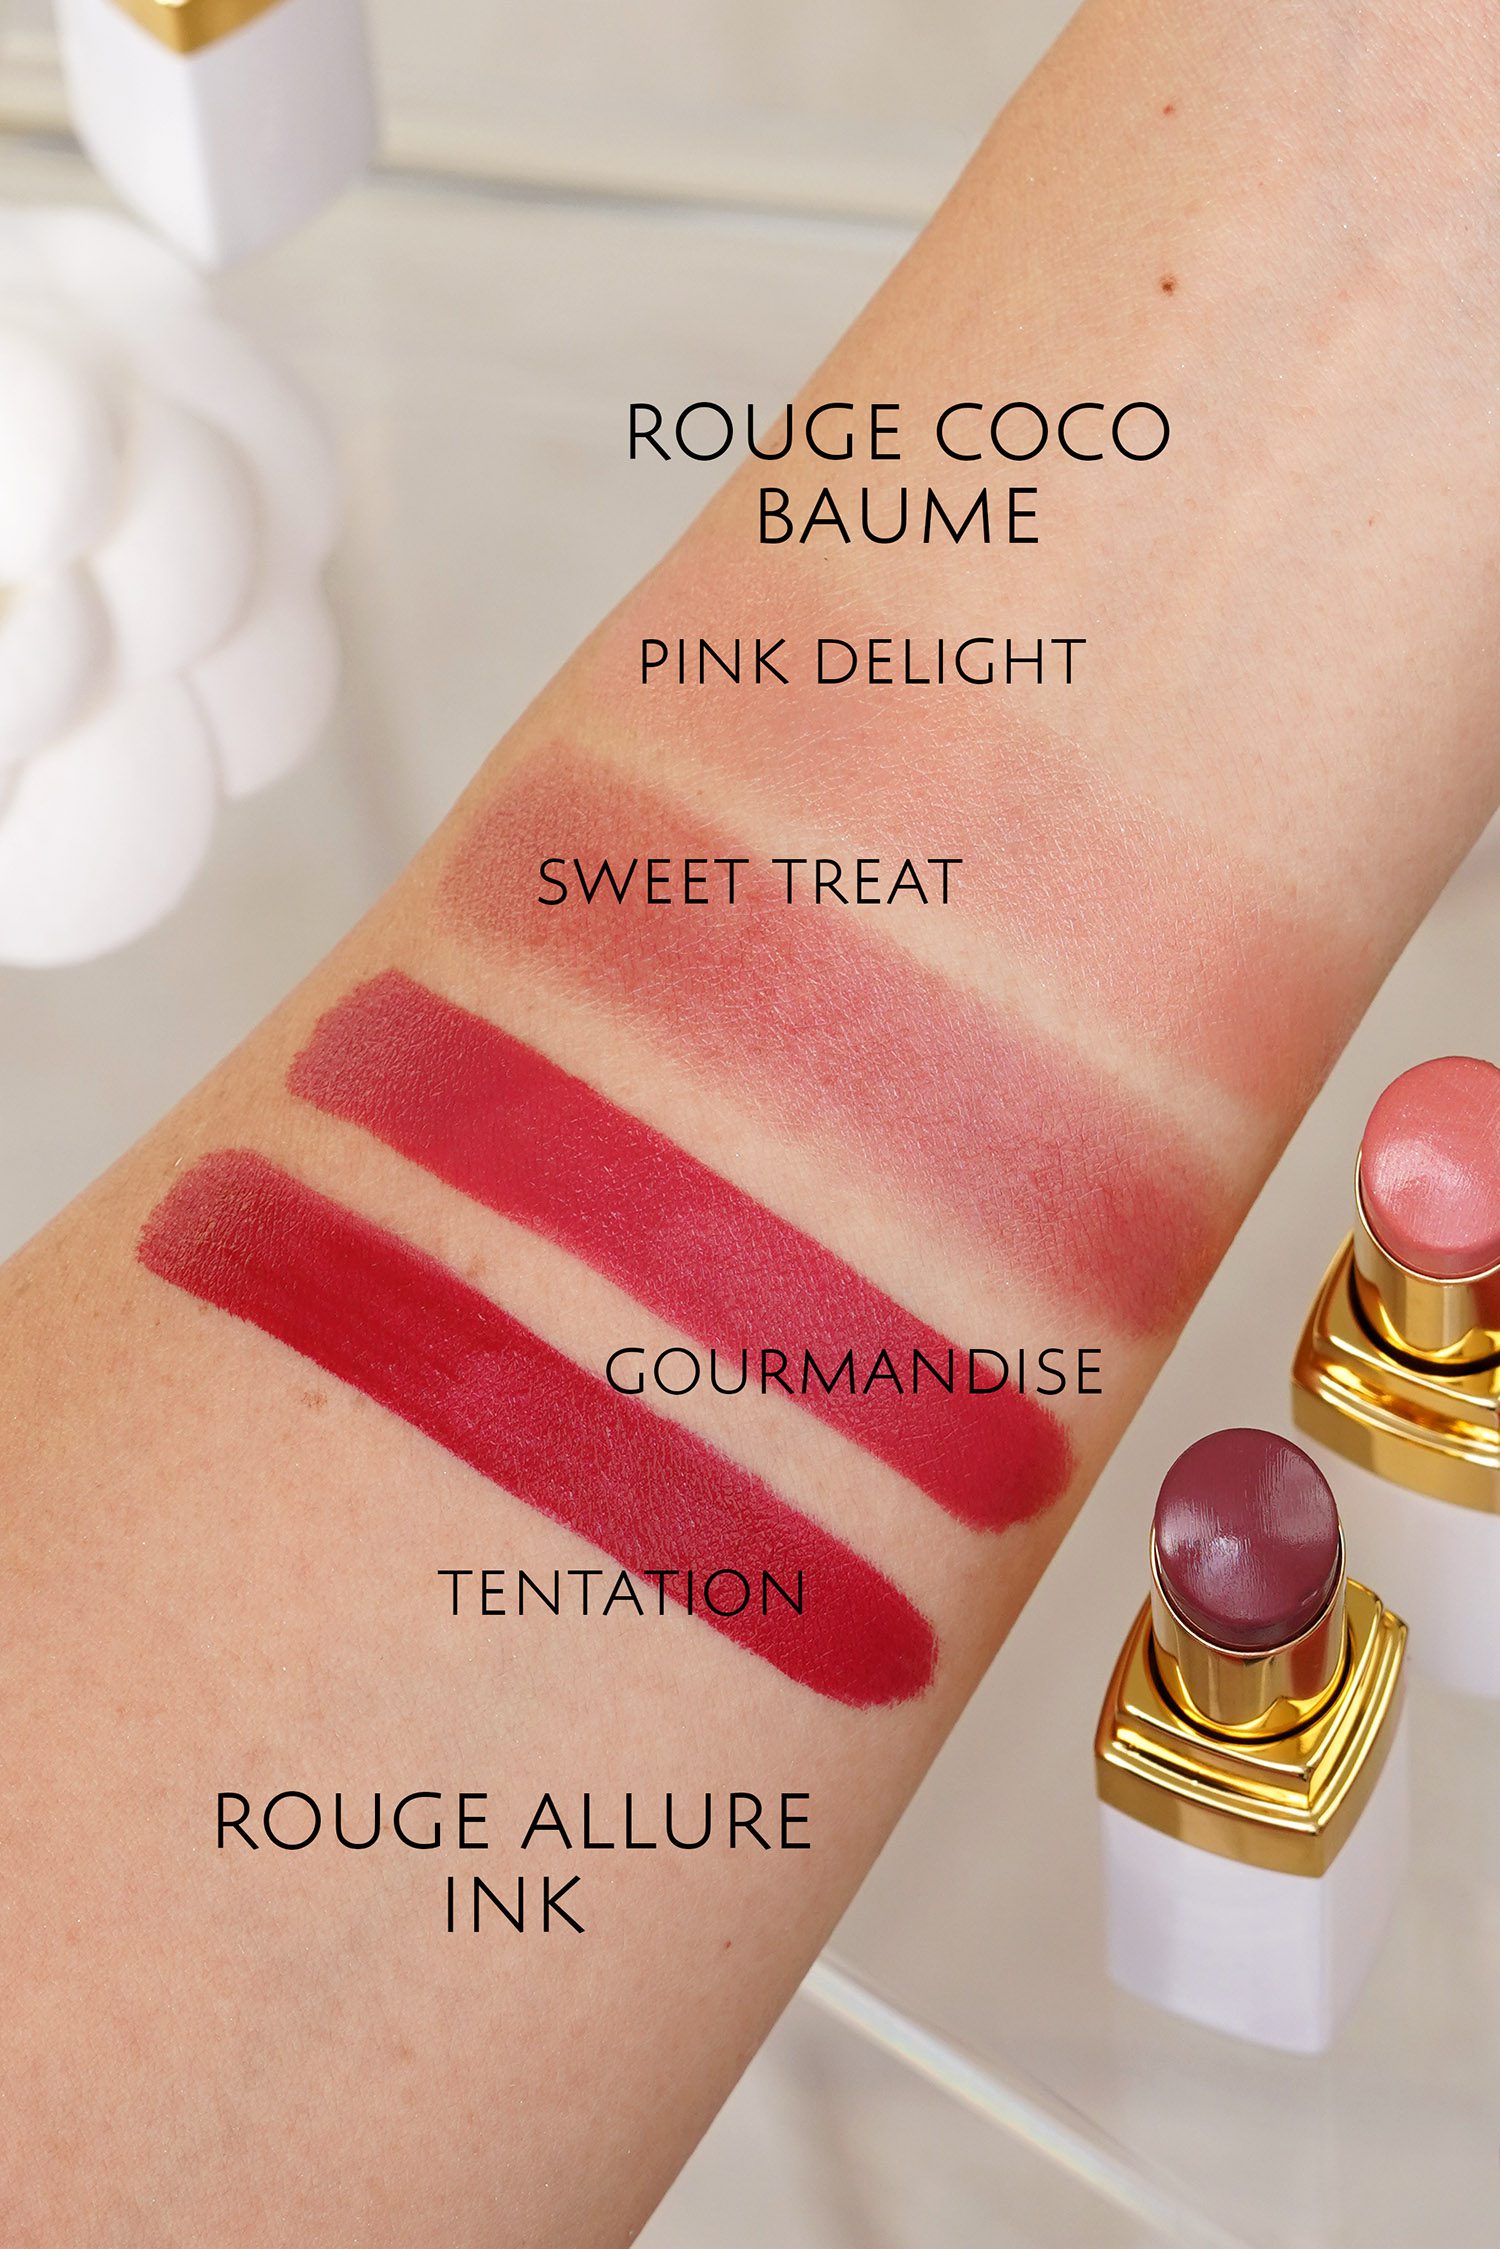 Chanel Merveille (124) Rouge Coco Bloom Lip Colour Review & Swatches